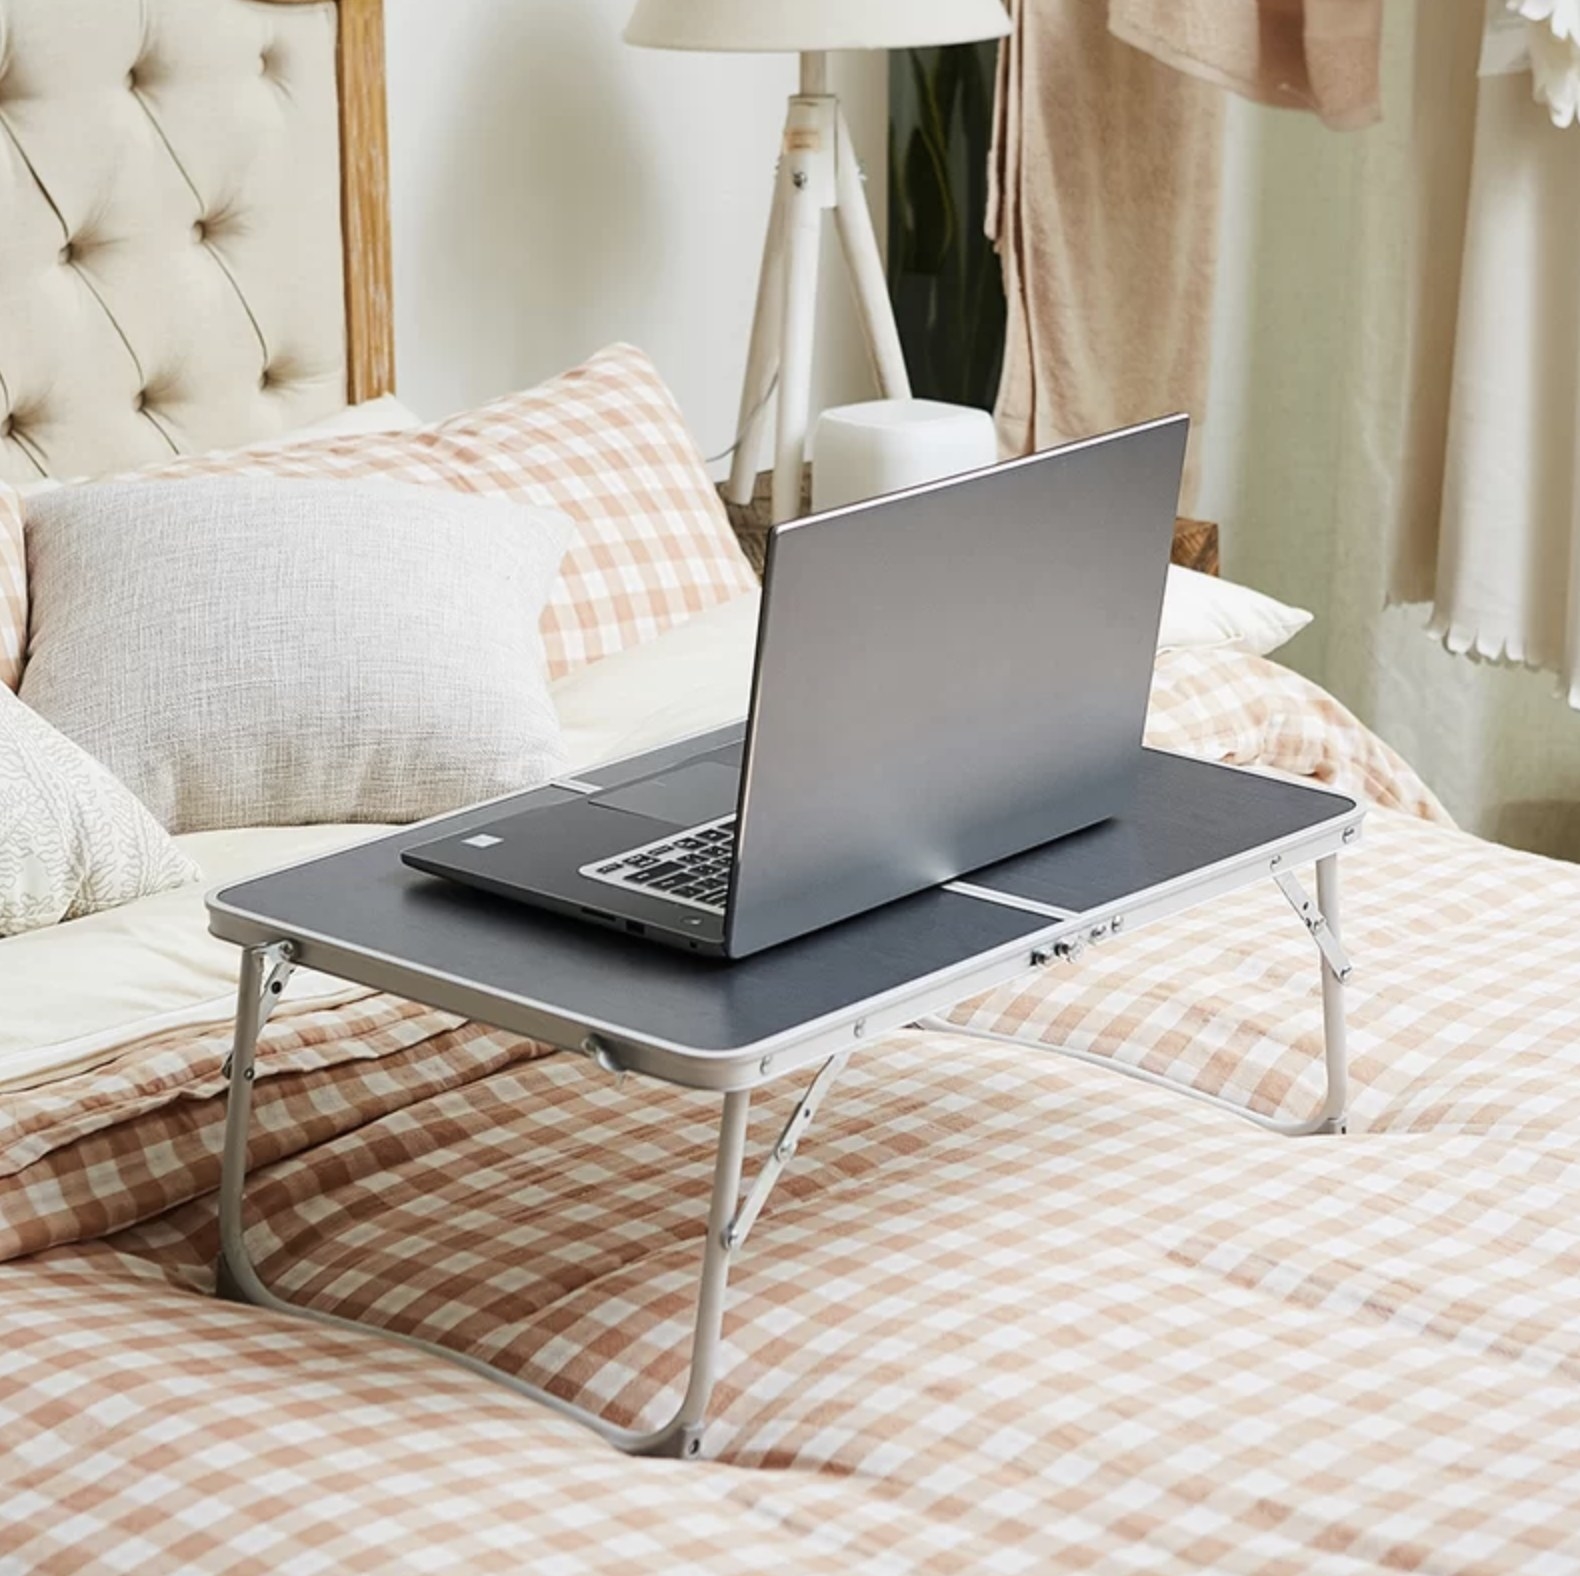 A laptop tray with a laptop on top on a bed